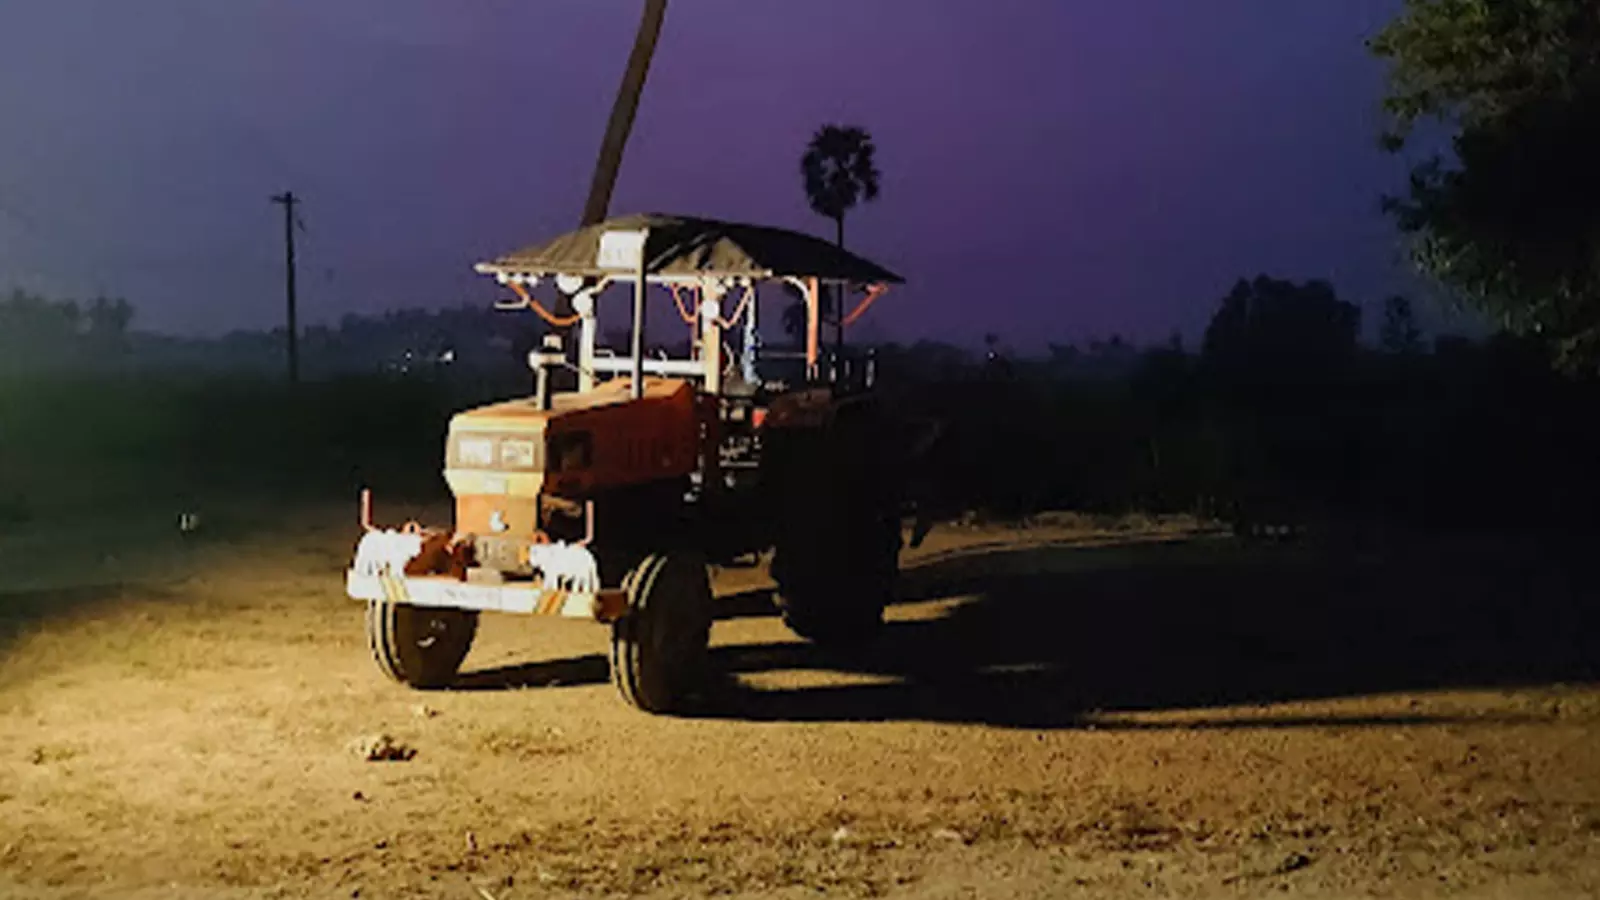 The 107-minute-long movie in Tamil portrays the story of Muthuvel, a young farmer, who buys a tractor.